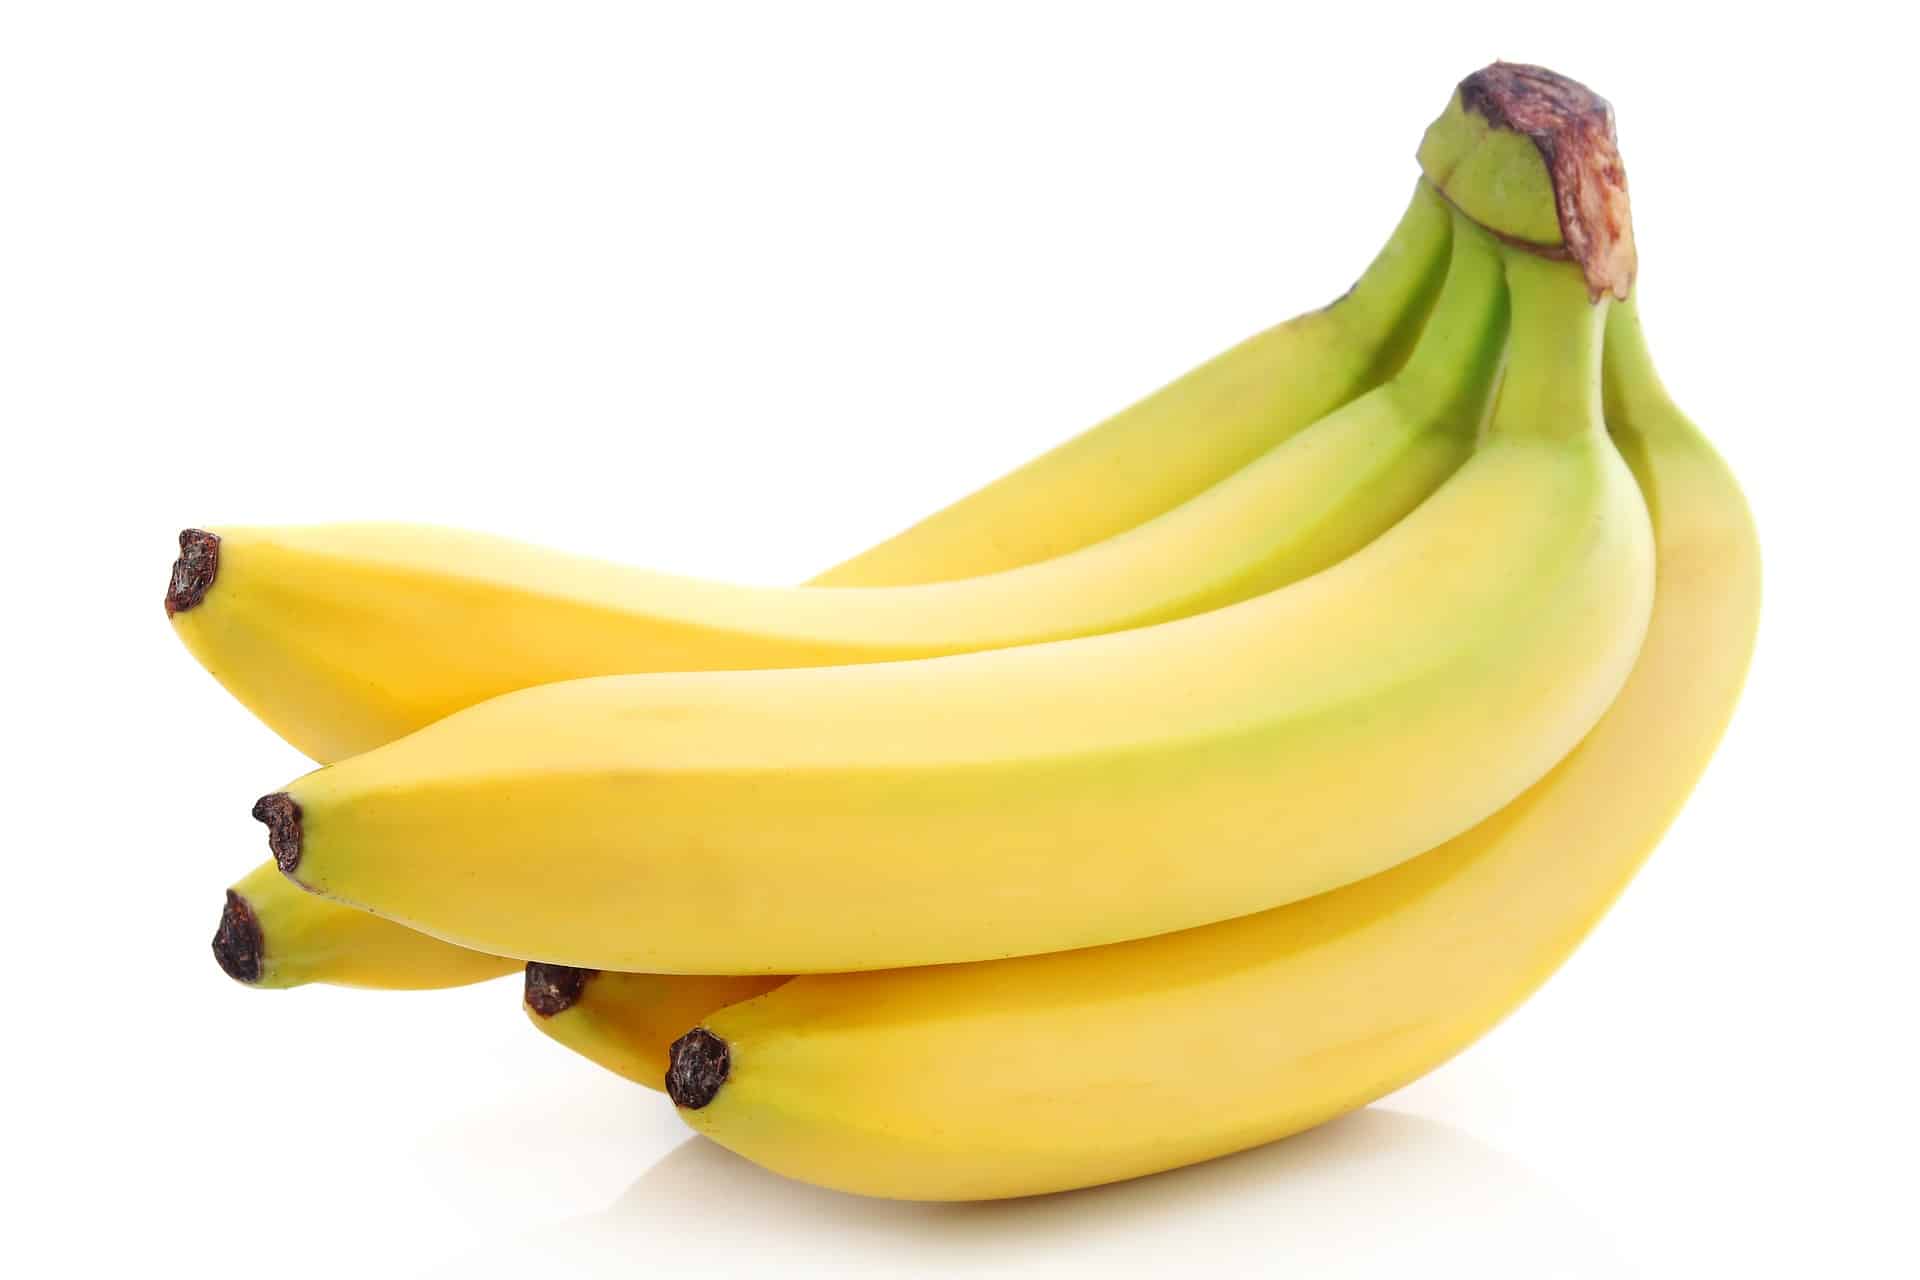 Are Bananas Bad? And Other Carbohydrate Myths